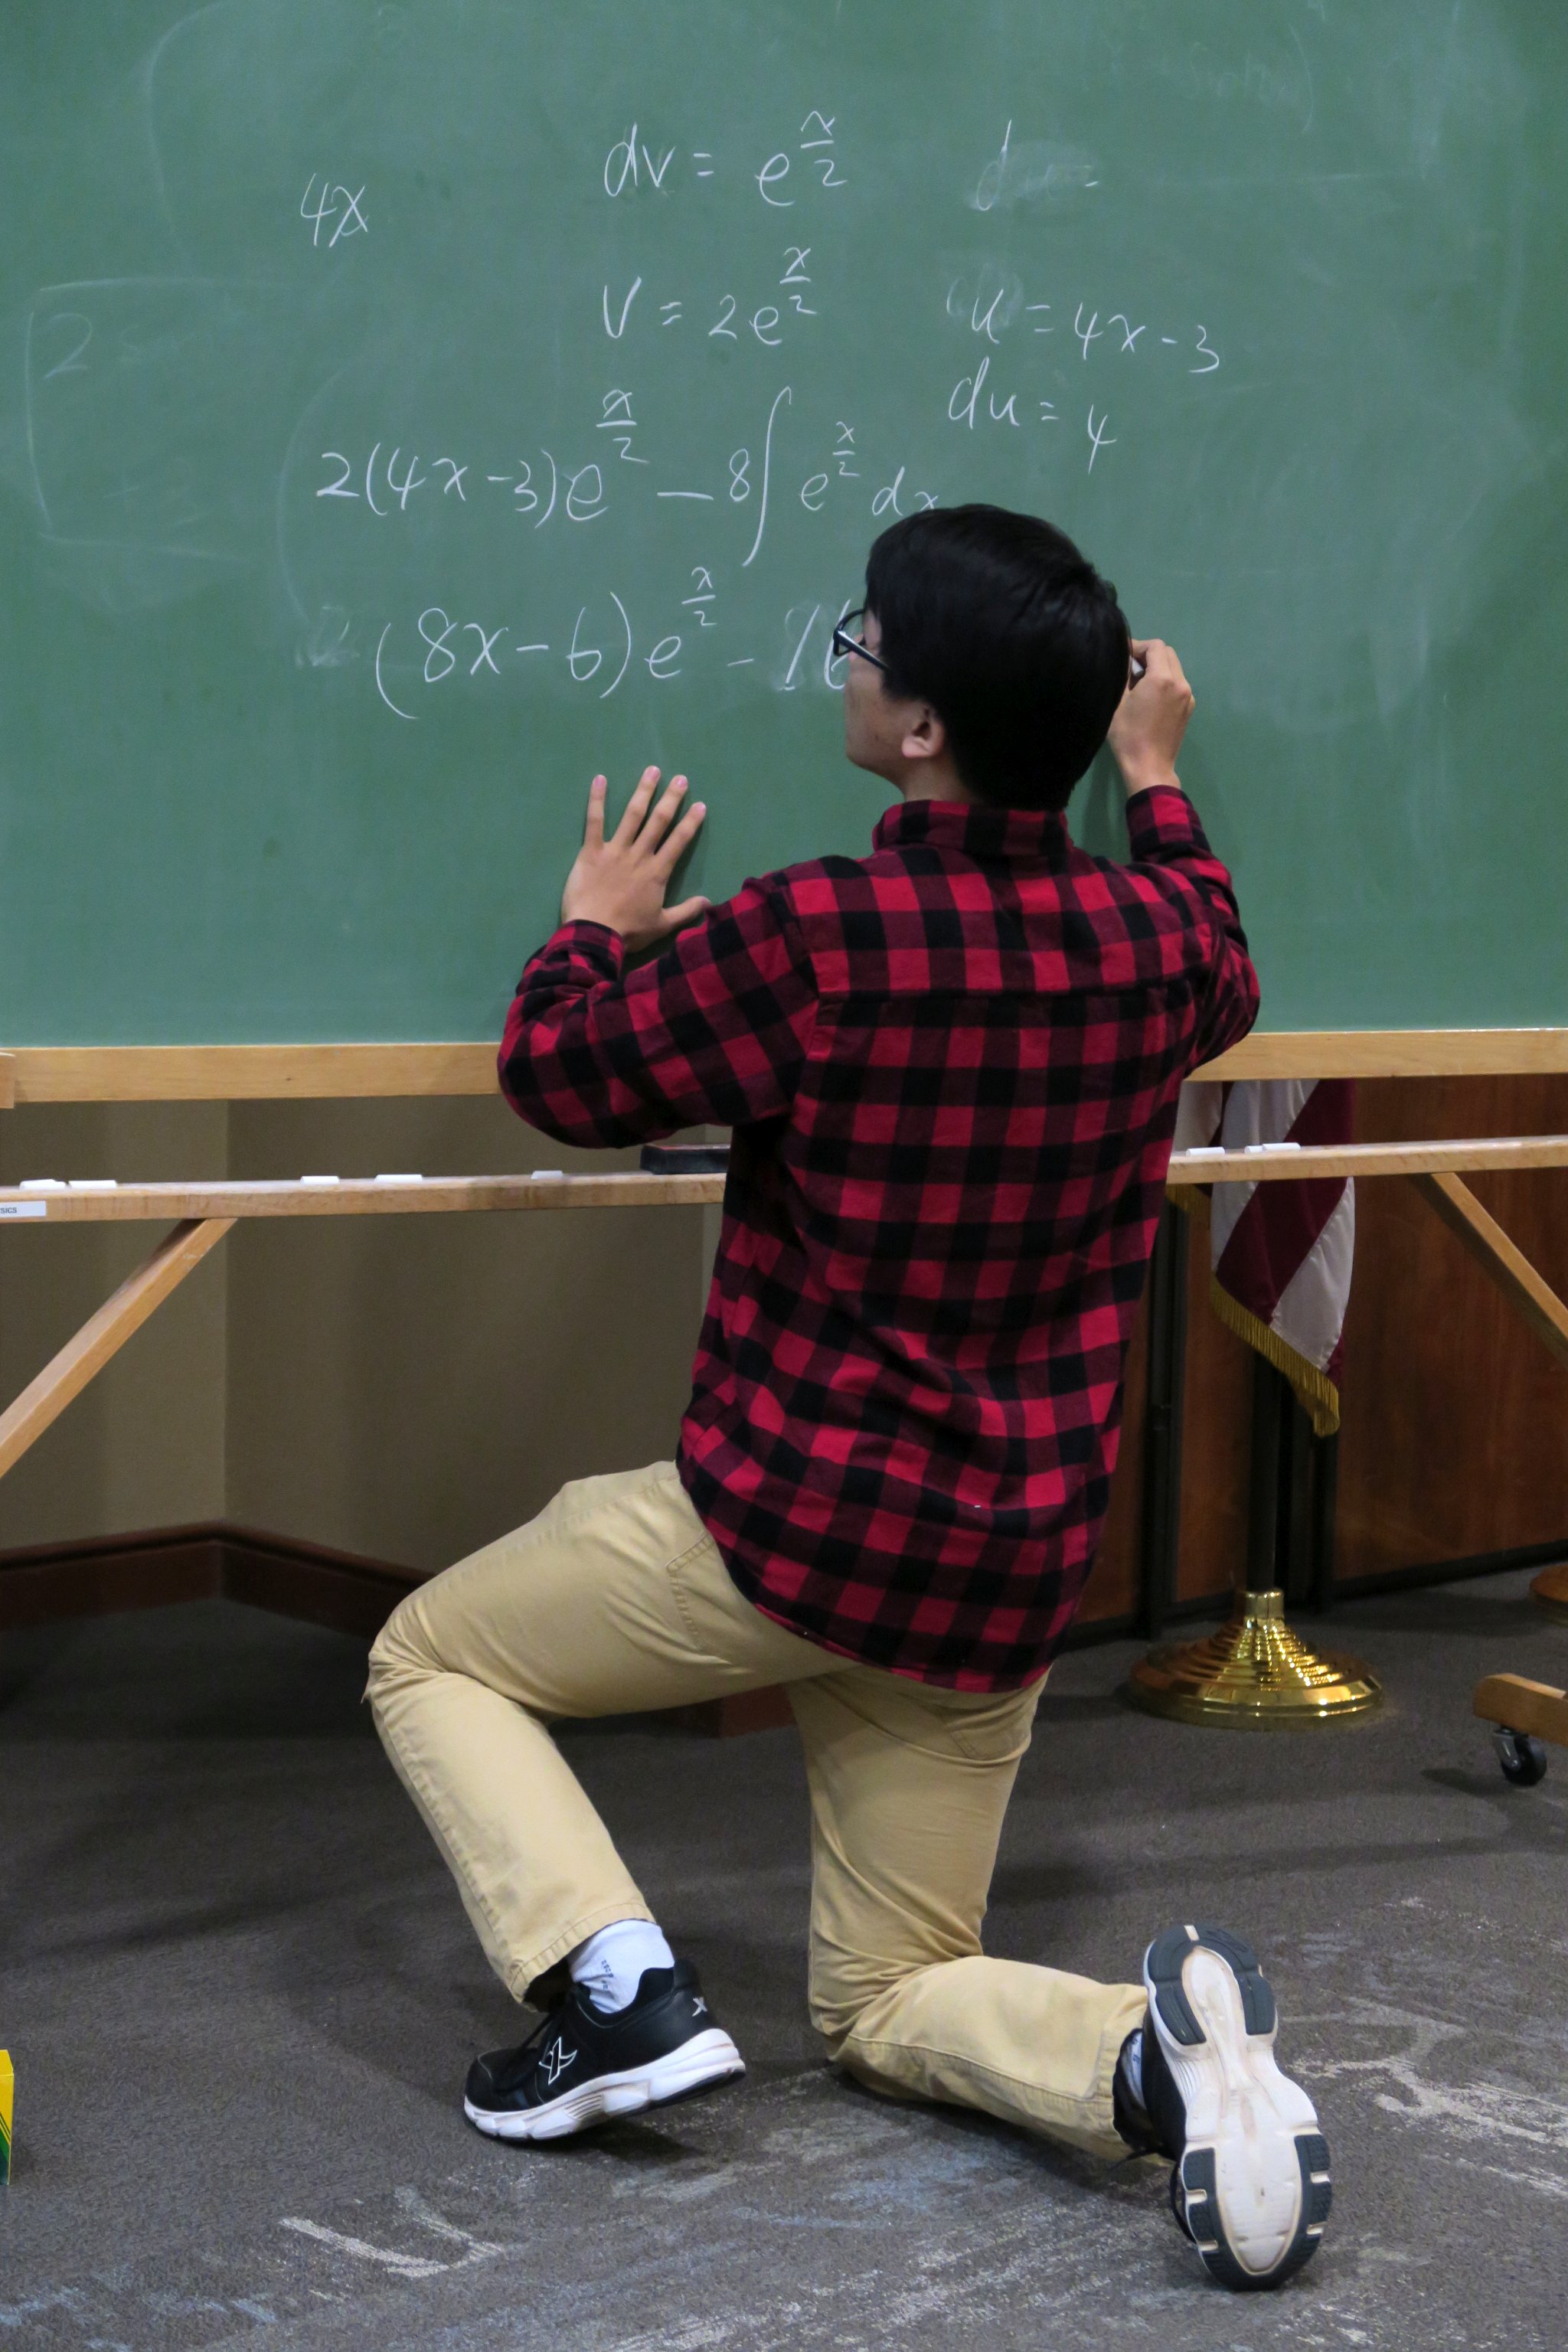 A male student solving an exponential integral by parts at the blackboard during the 2019 Integration Bee